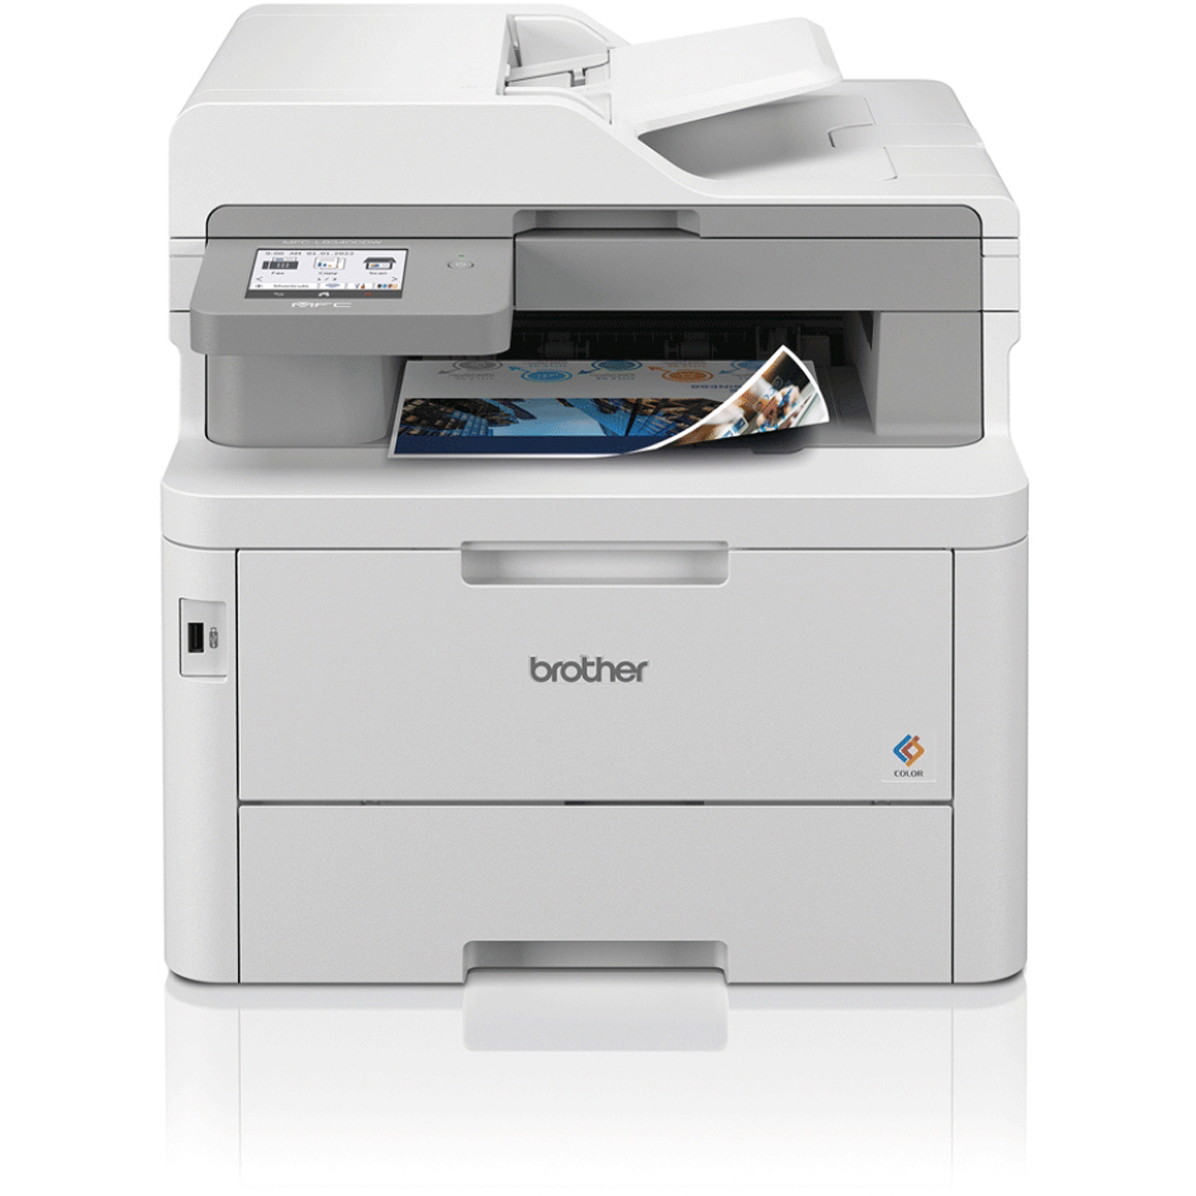 Original Brother Mfc-L8340Cdw Compact A4 Colour Led All-In-1 Laser Printer (MFCL8340CDWQJ1)